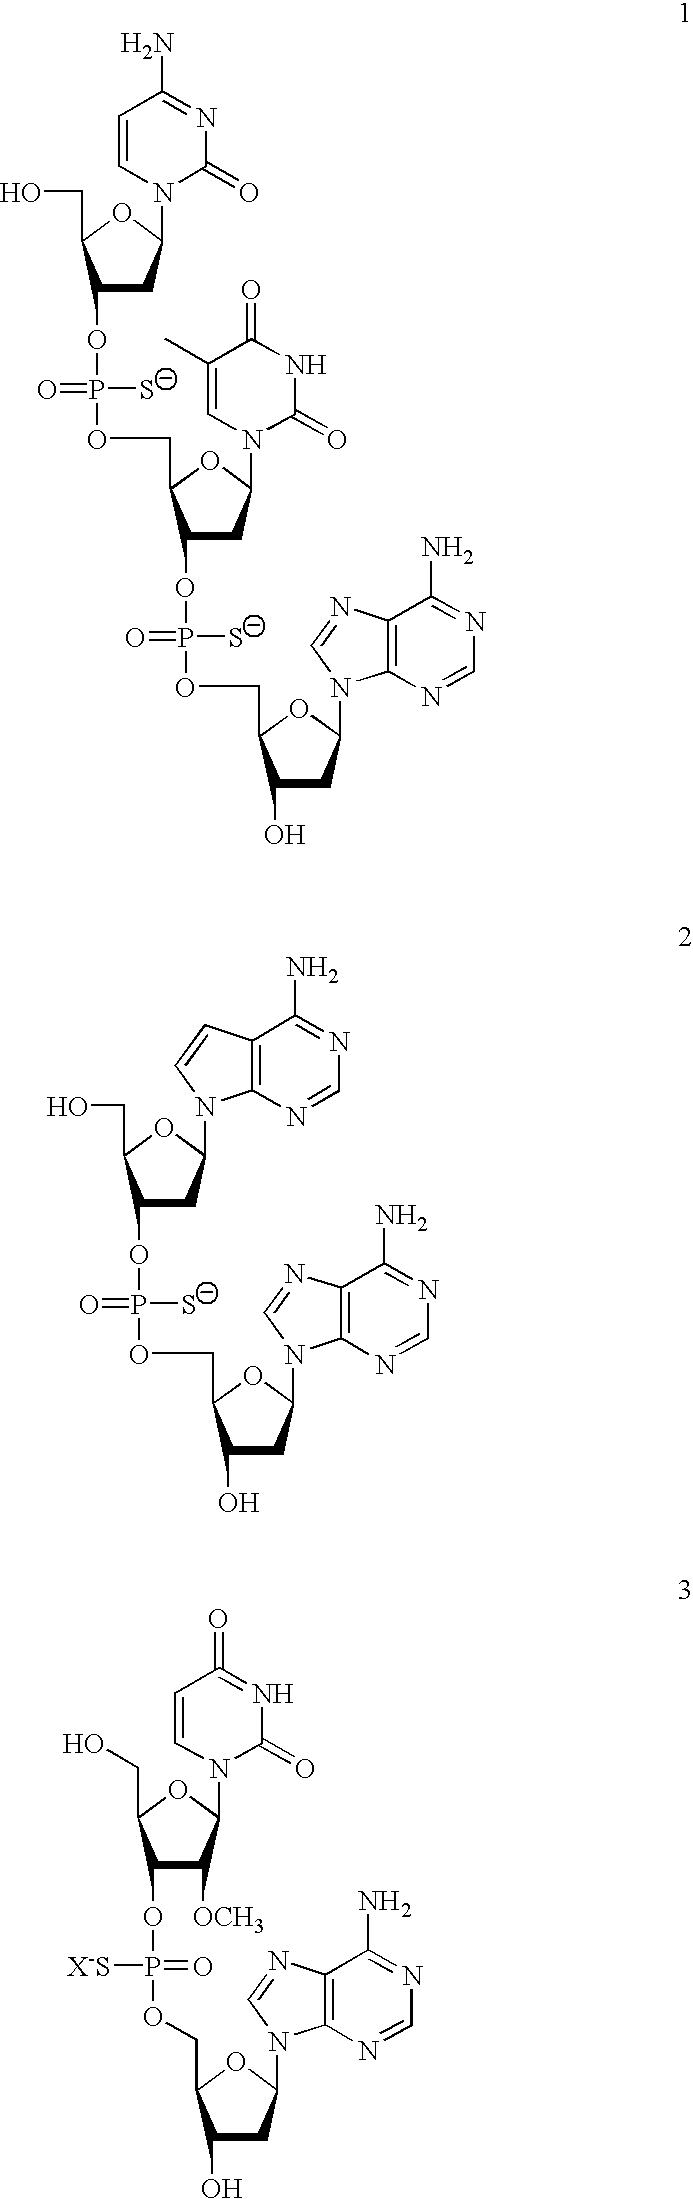 Nucleic acid-based compounds and methods of use thereof